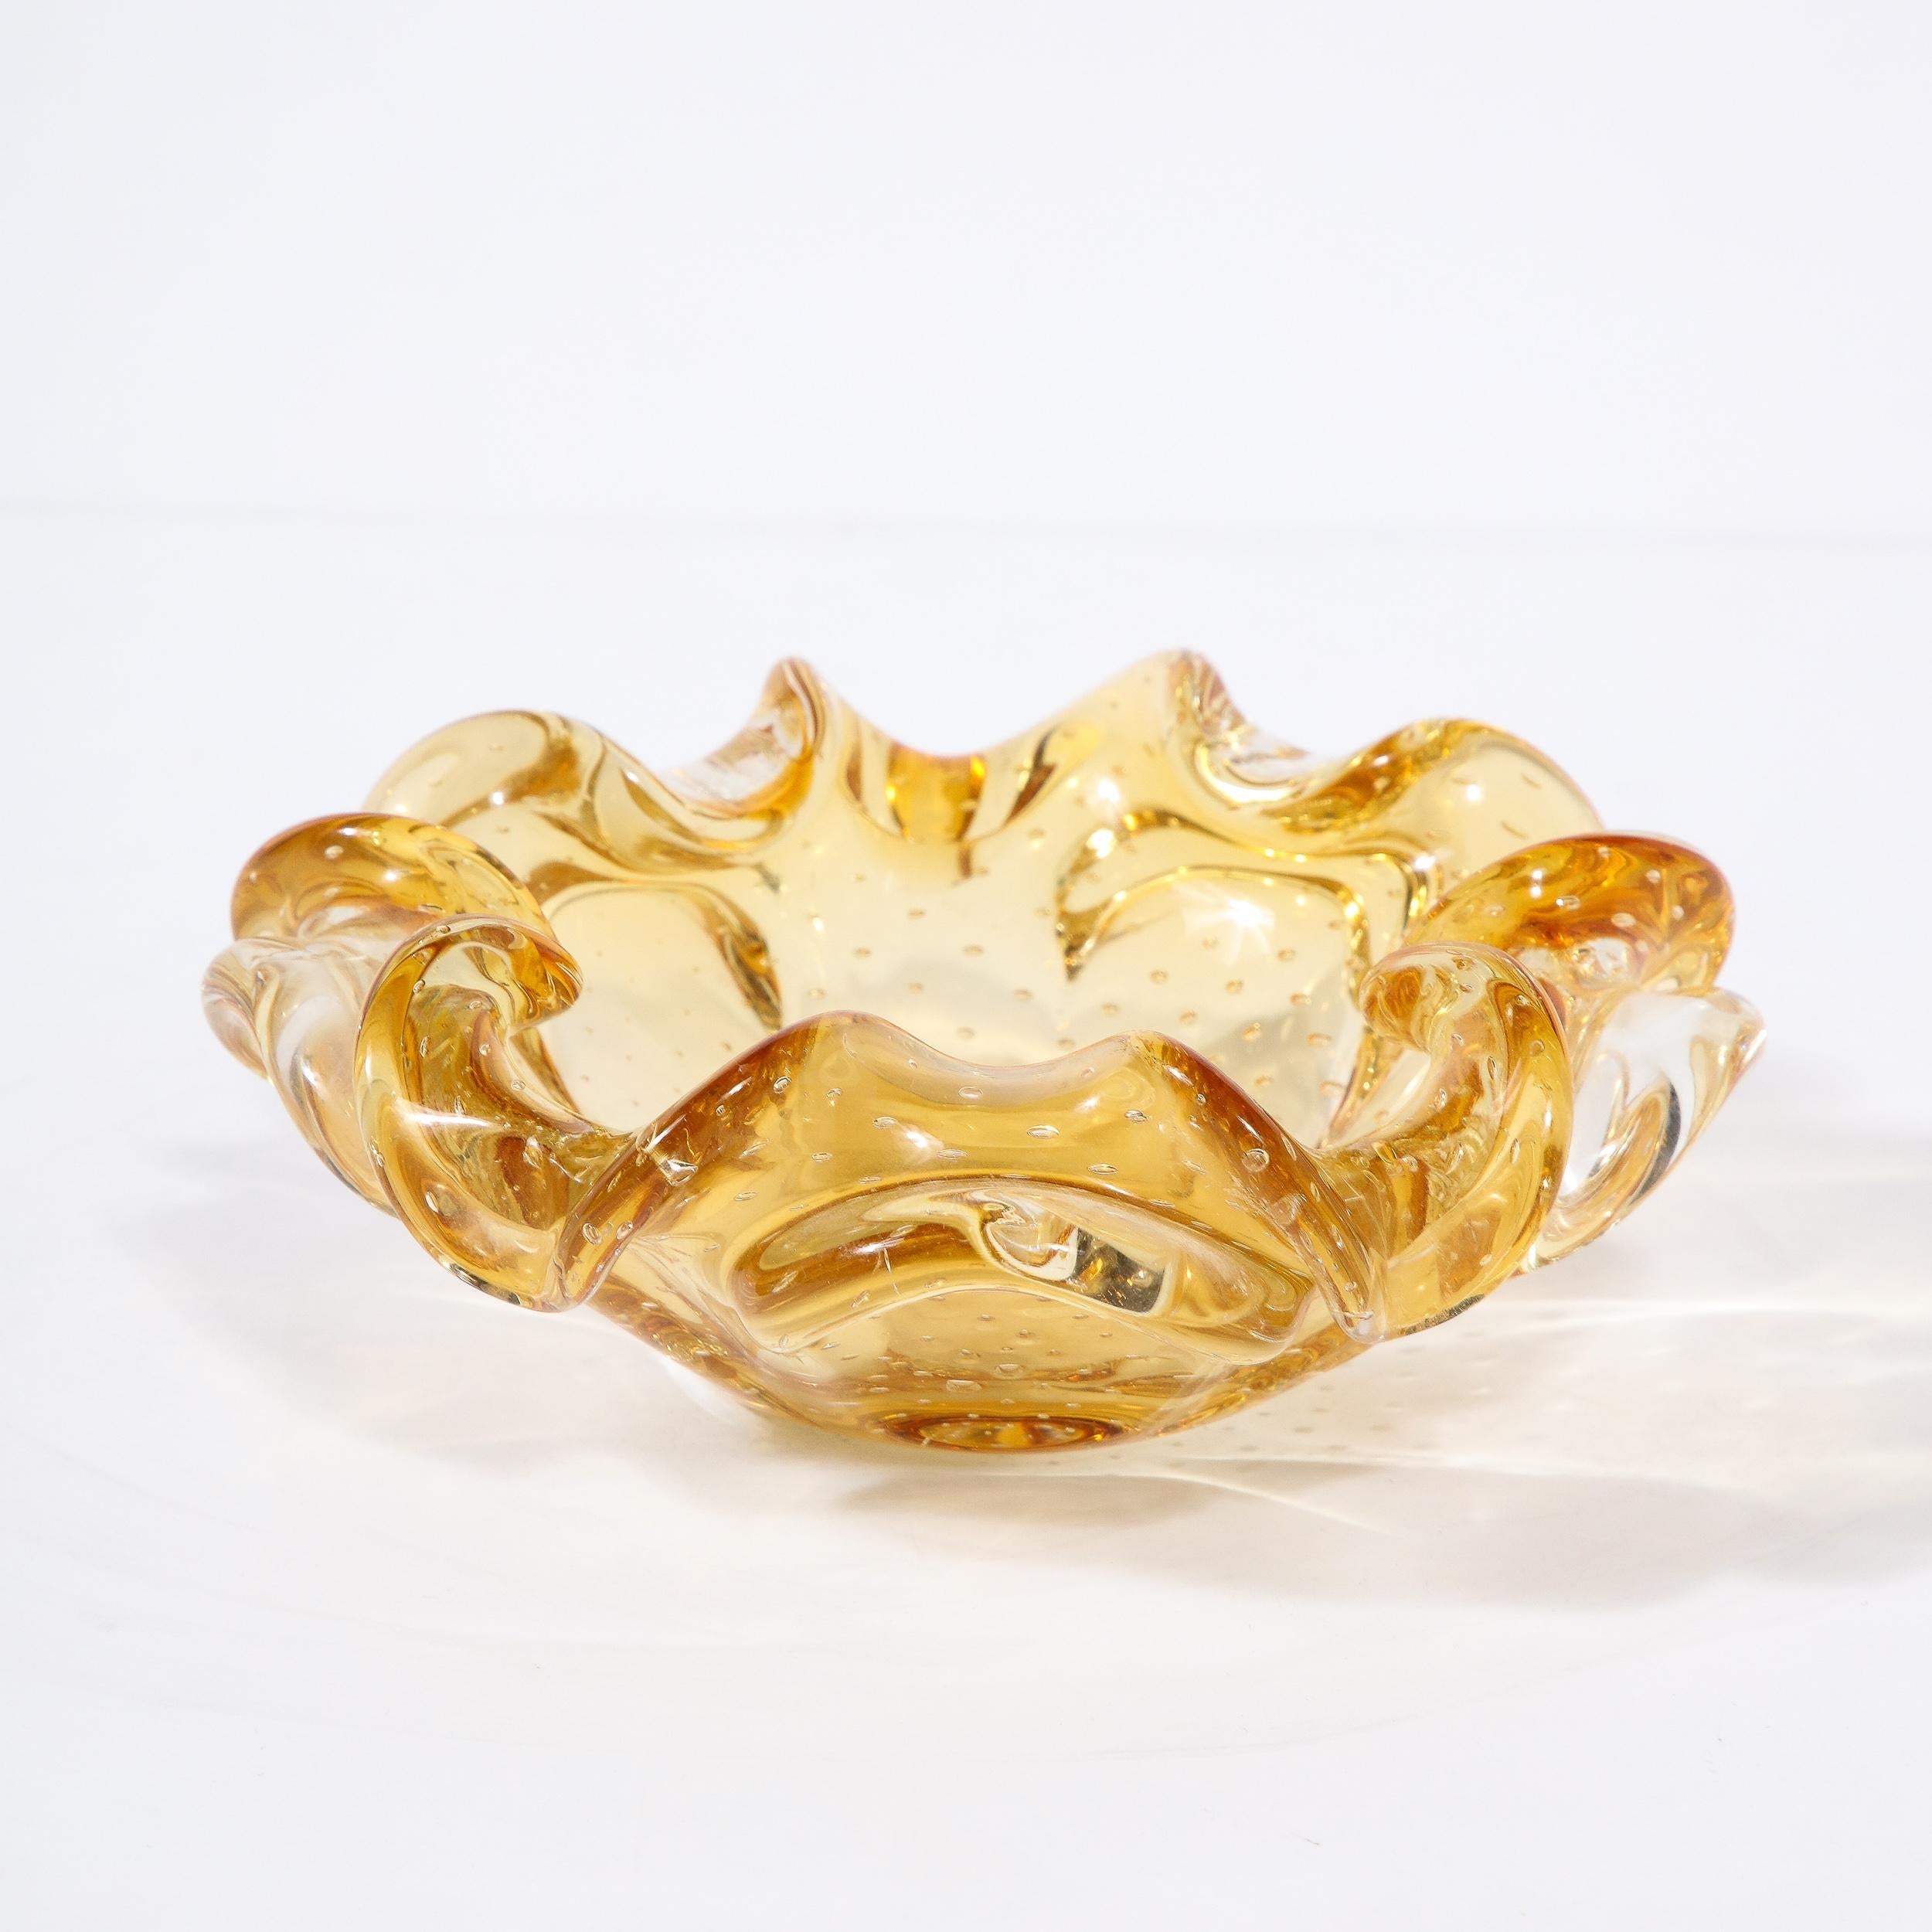 This dynamic and elegant Mid-Century Modernist Hand-Blown Murano Glass Dish in Citrine with Murine Detailing originates from Italy, Circa 1950. Coming from the Island of Murano Italy known throughout the centuries for glass work of the highest